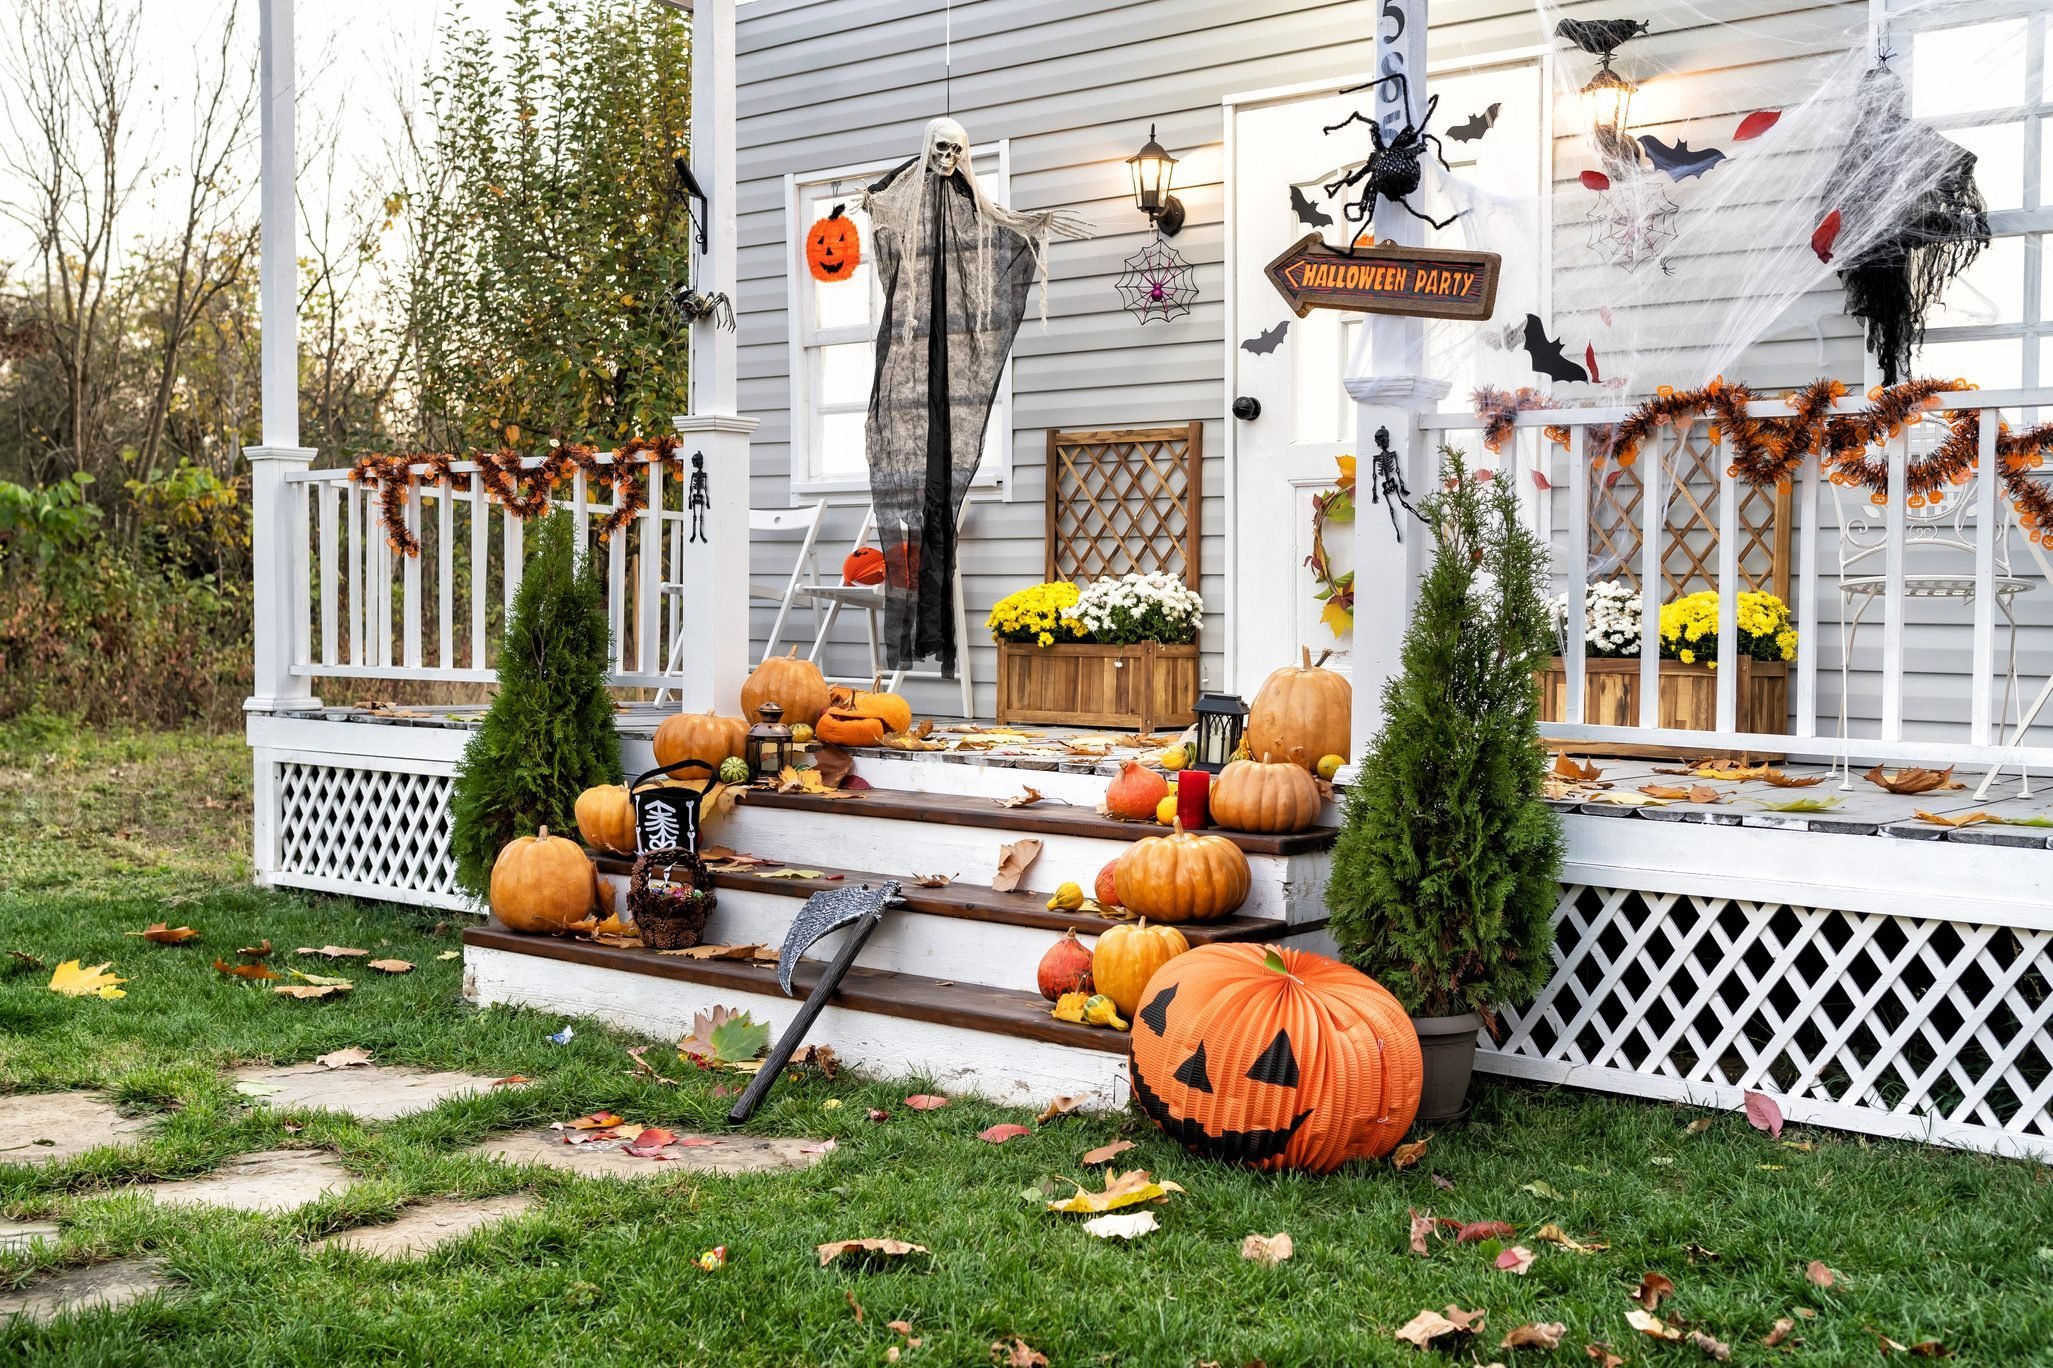 How To Use Dolls As A Halloween Yard Decorations - Roberts Inforent